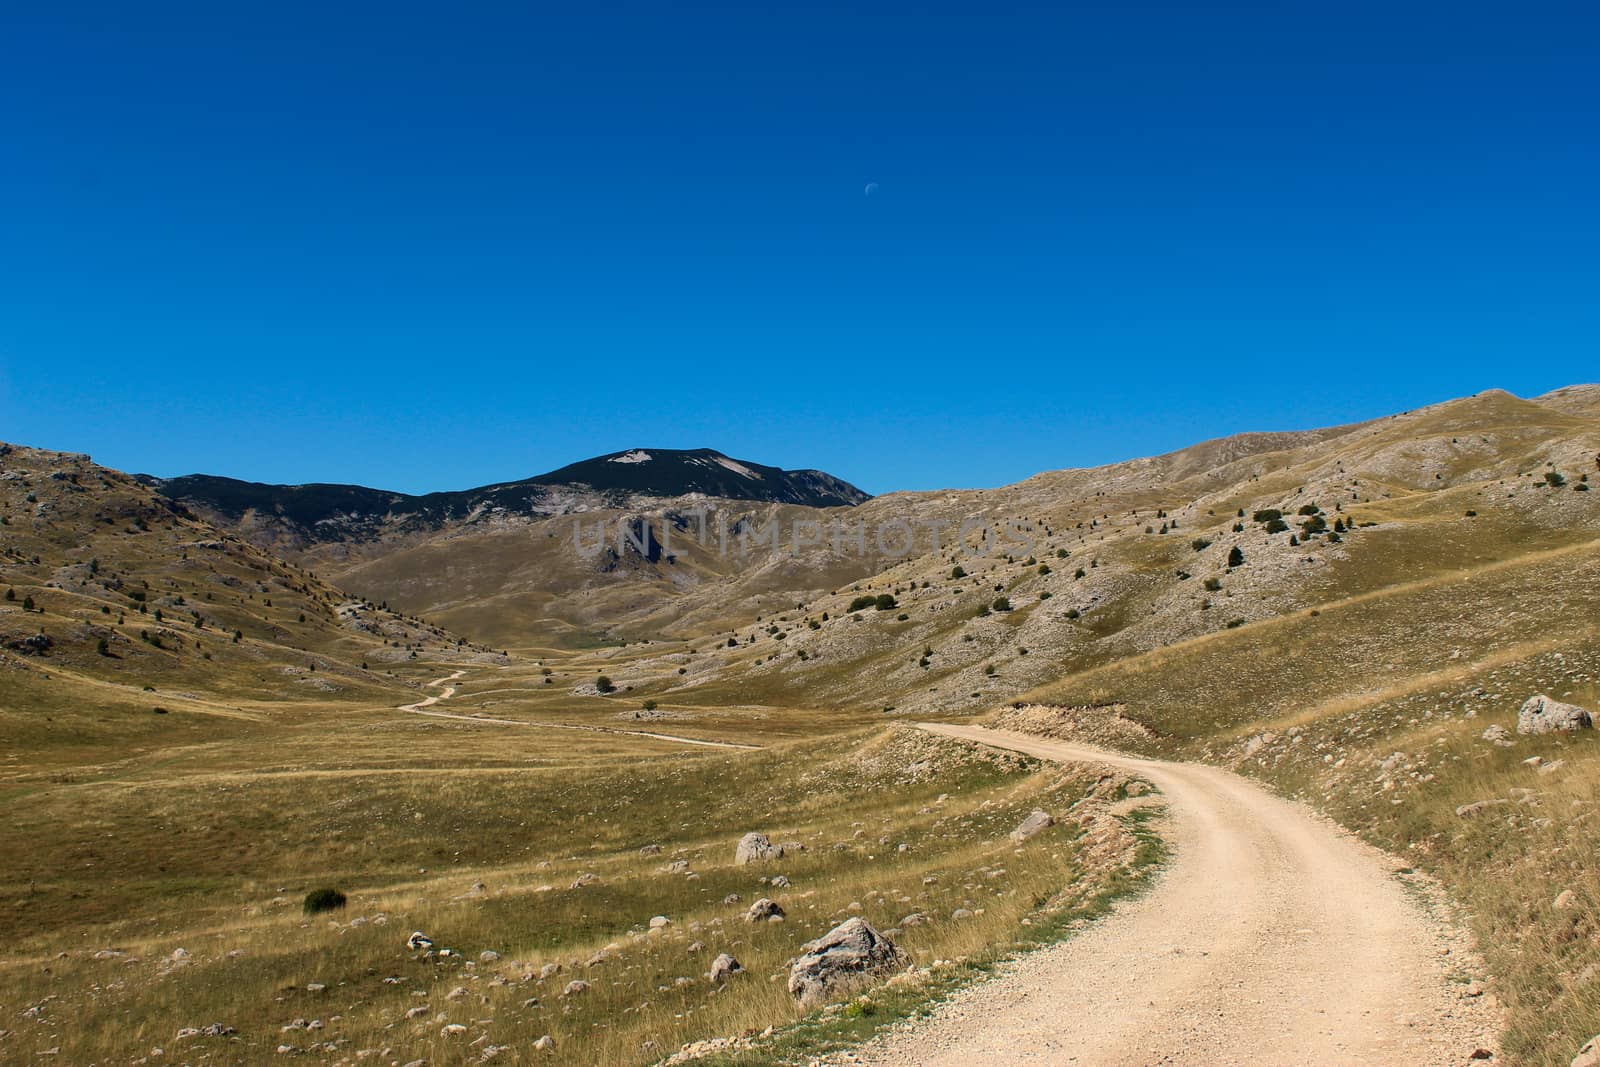 Old mountain road, rocky landscape, mountain top in the background with blue sky and moon. Bjelasnica Mountain, Bosnia and Herzegovina. by mahirrov